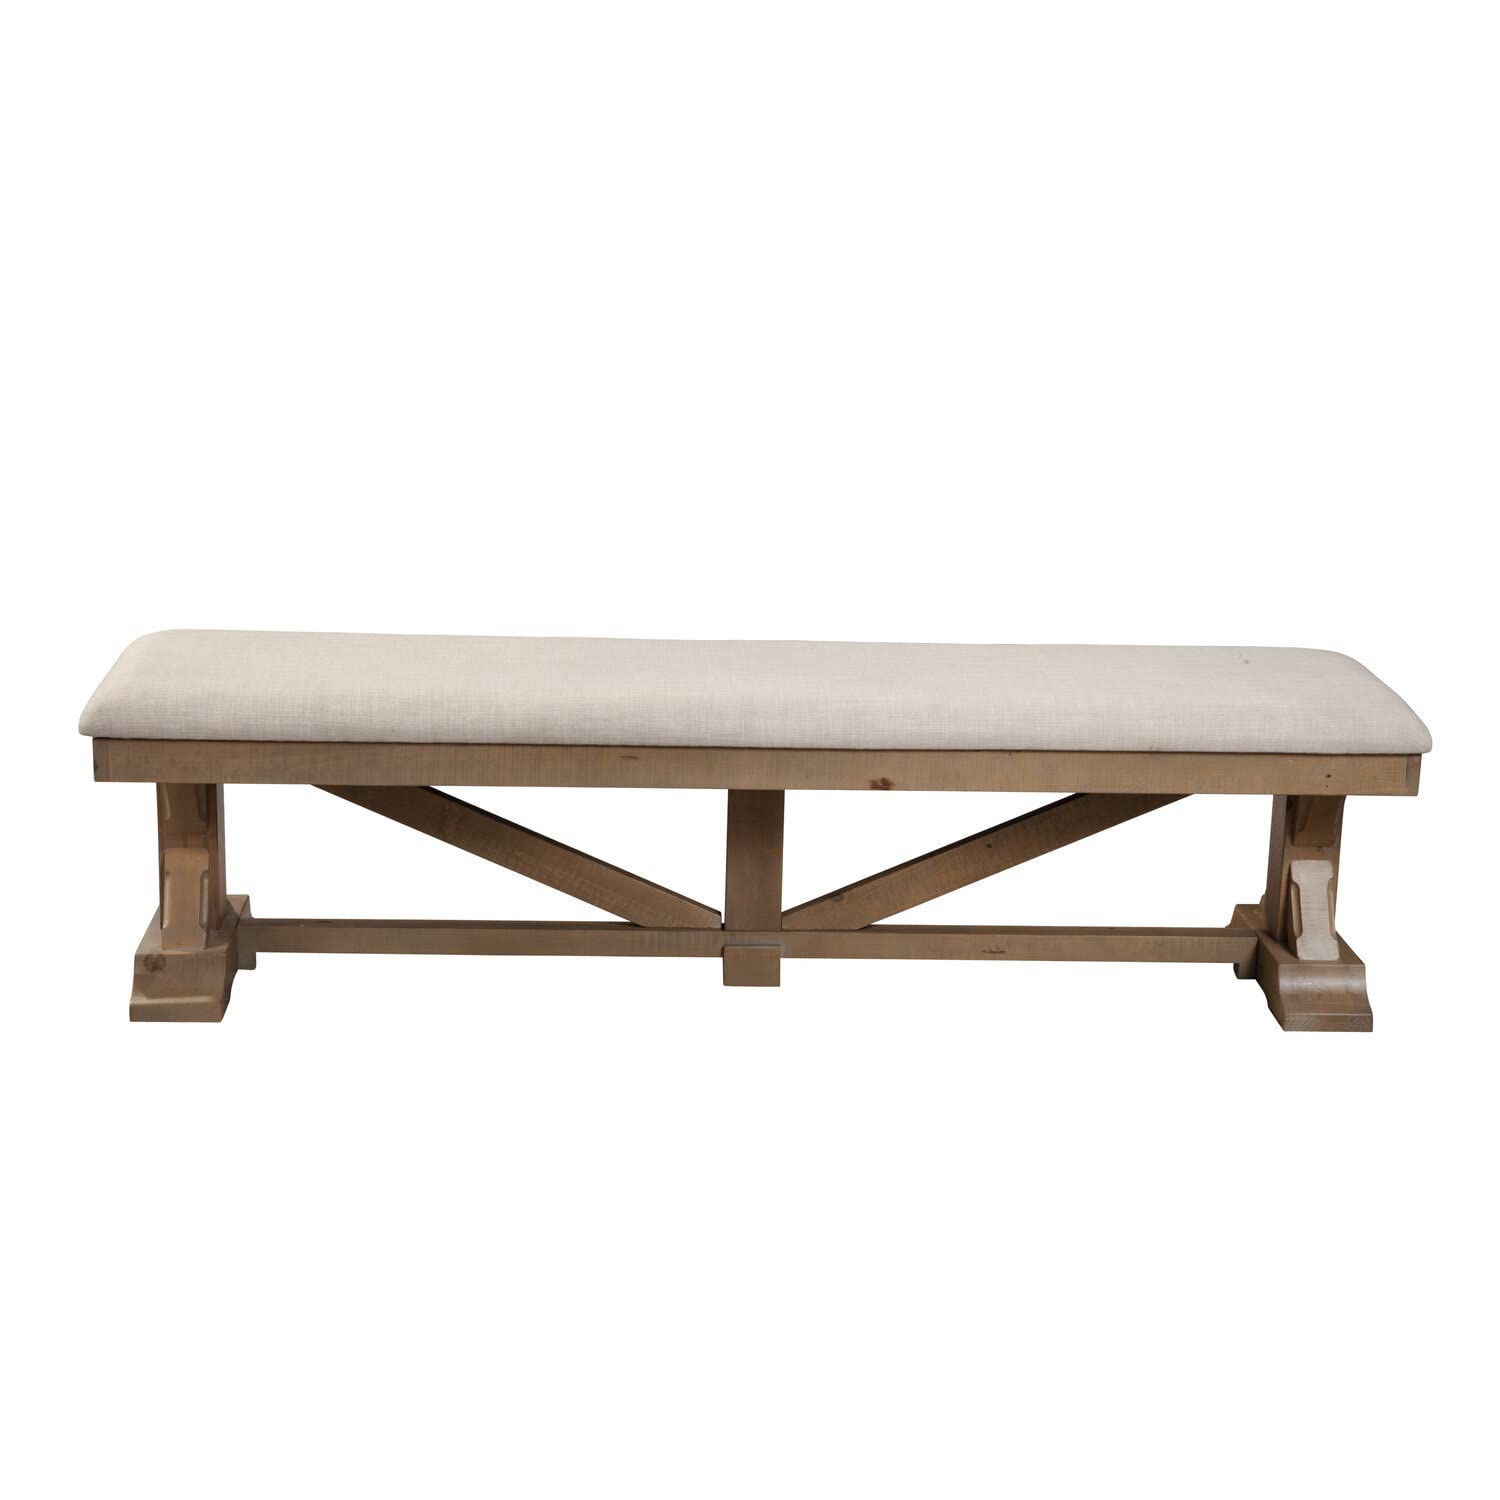 Alpine Furniture Arlo Wood Dining Bench Bench in Natural Brown